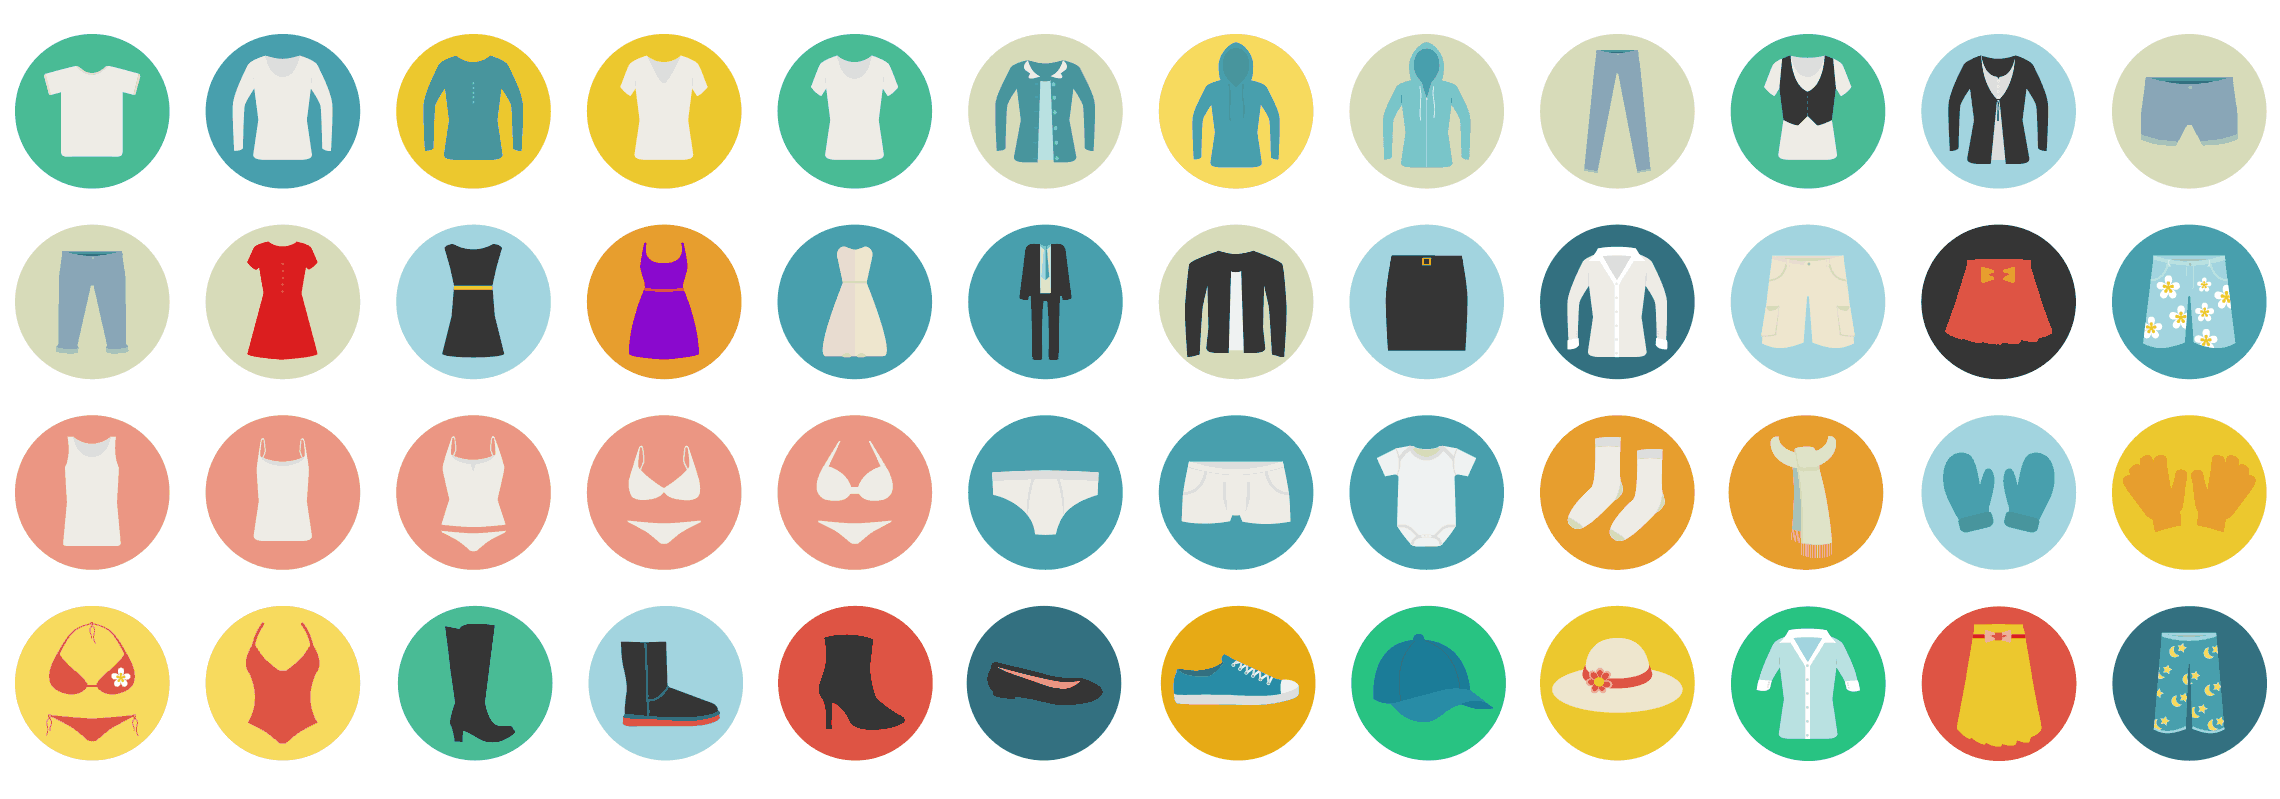 clothes-flat-icons-vol-1-preview